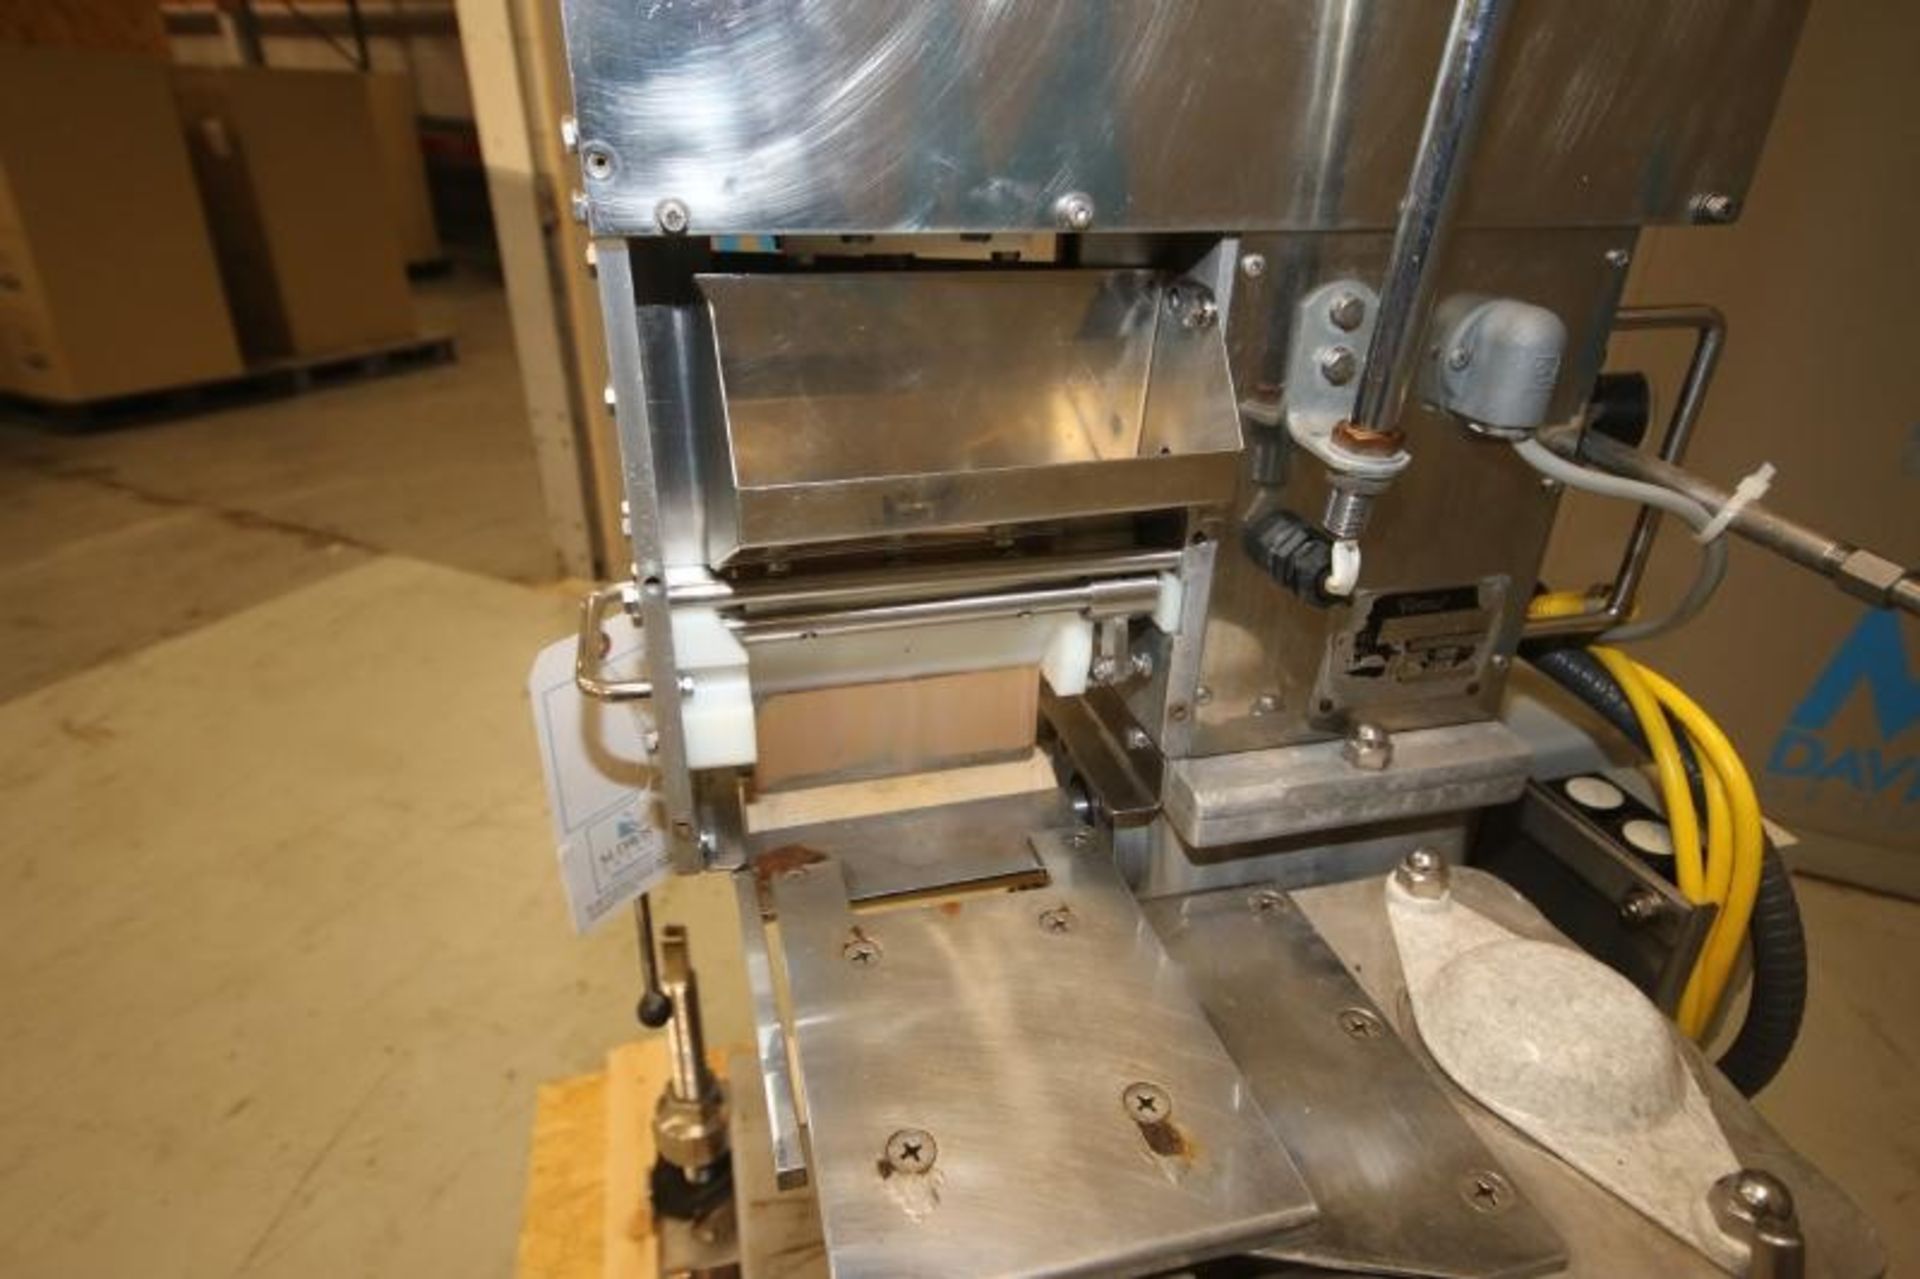 Rheon S/S Guillotine Style Vertical Cross Cutter,Model GK420, SN396, with 5.5 " Length Knife, Aprox. - Image 6 of 8